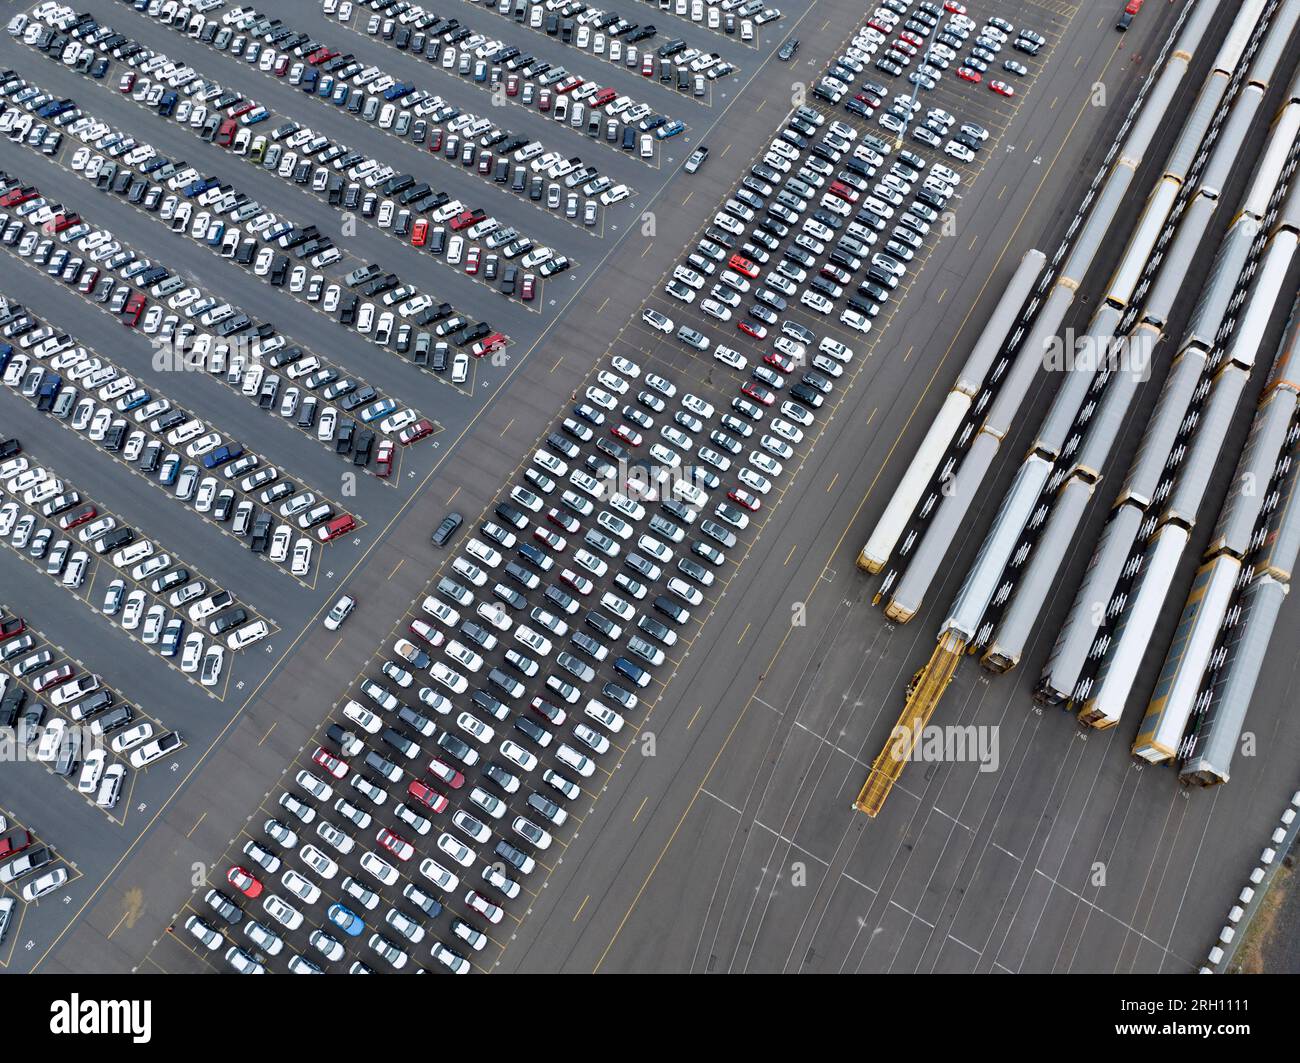 Imported auto storage and transfer yard where cars arrive by ship and are distributed by rail and truck to points in the U.S. Stock Photo